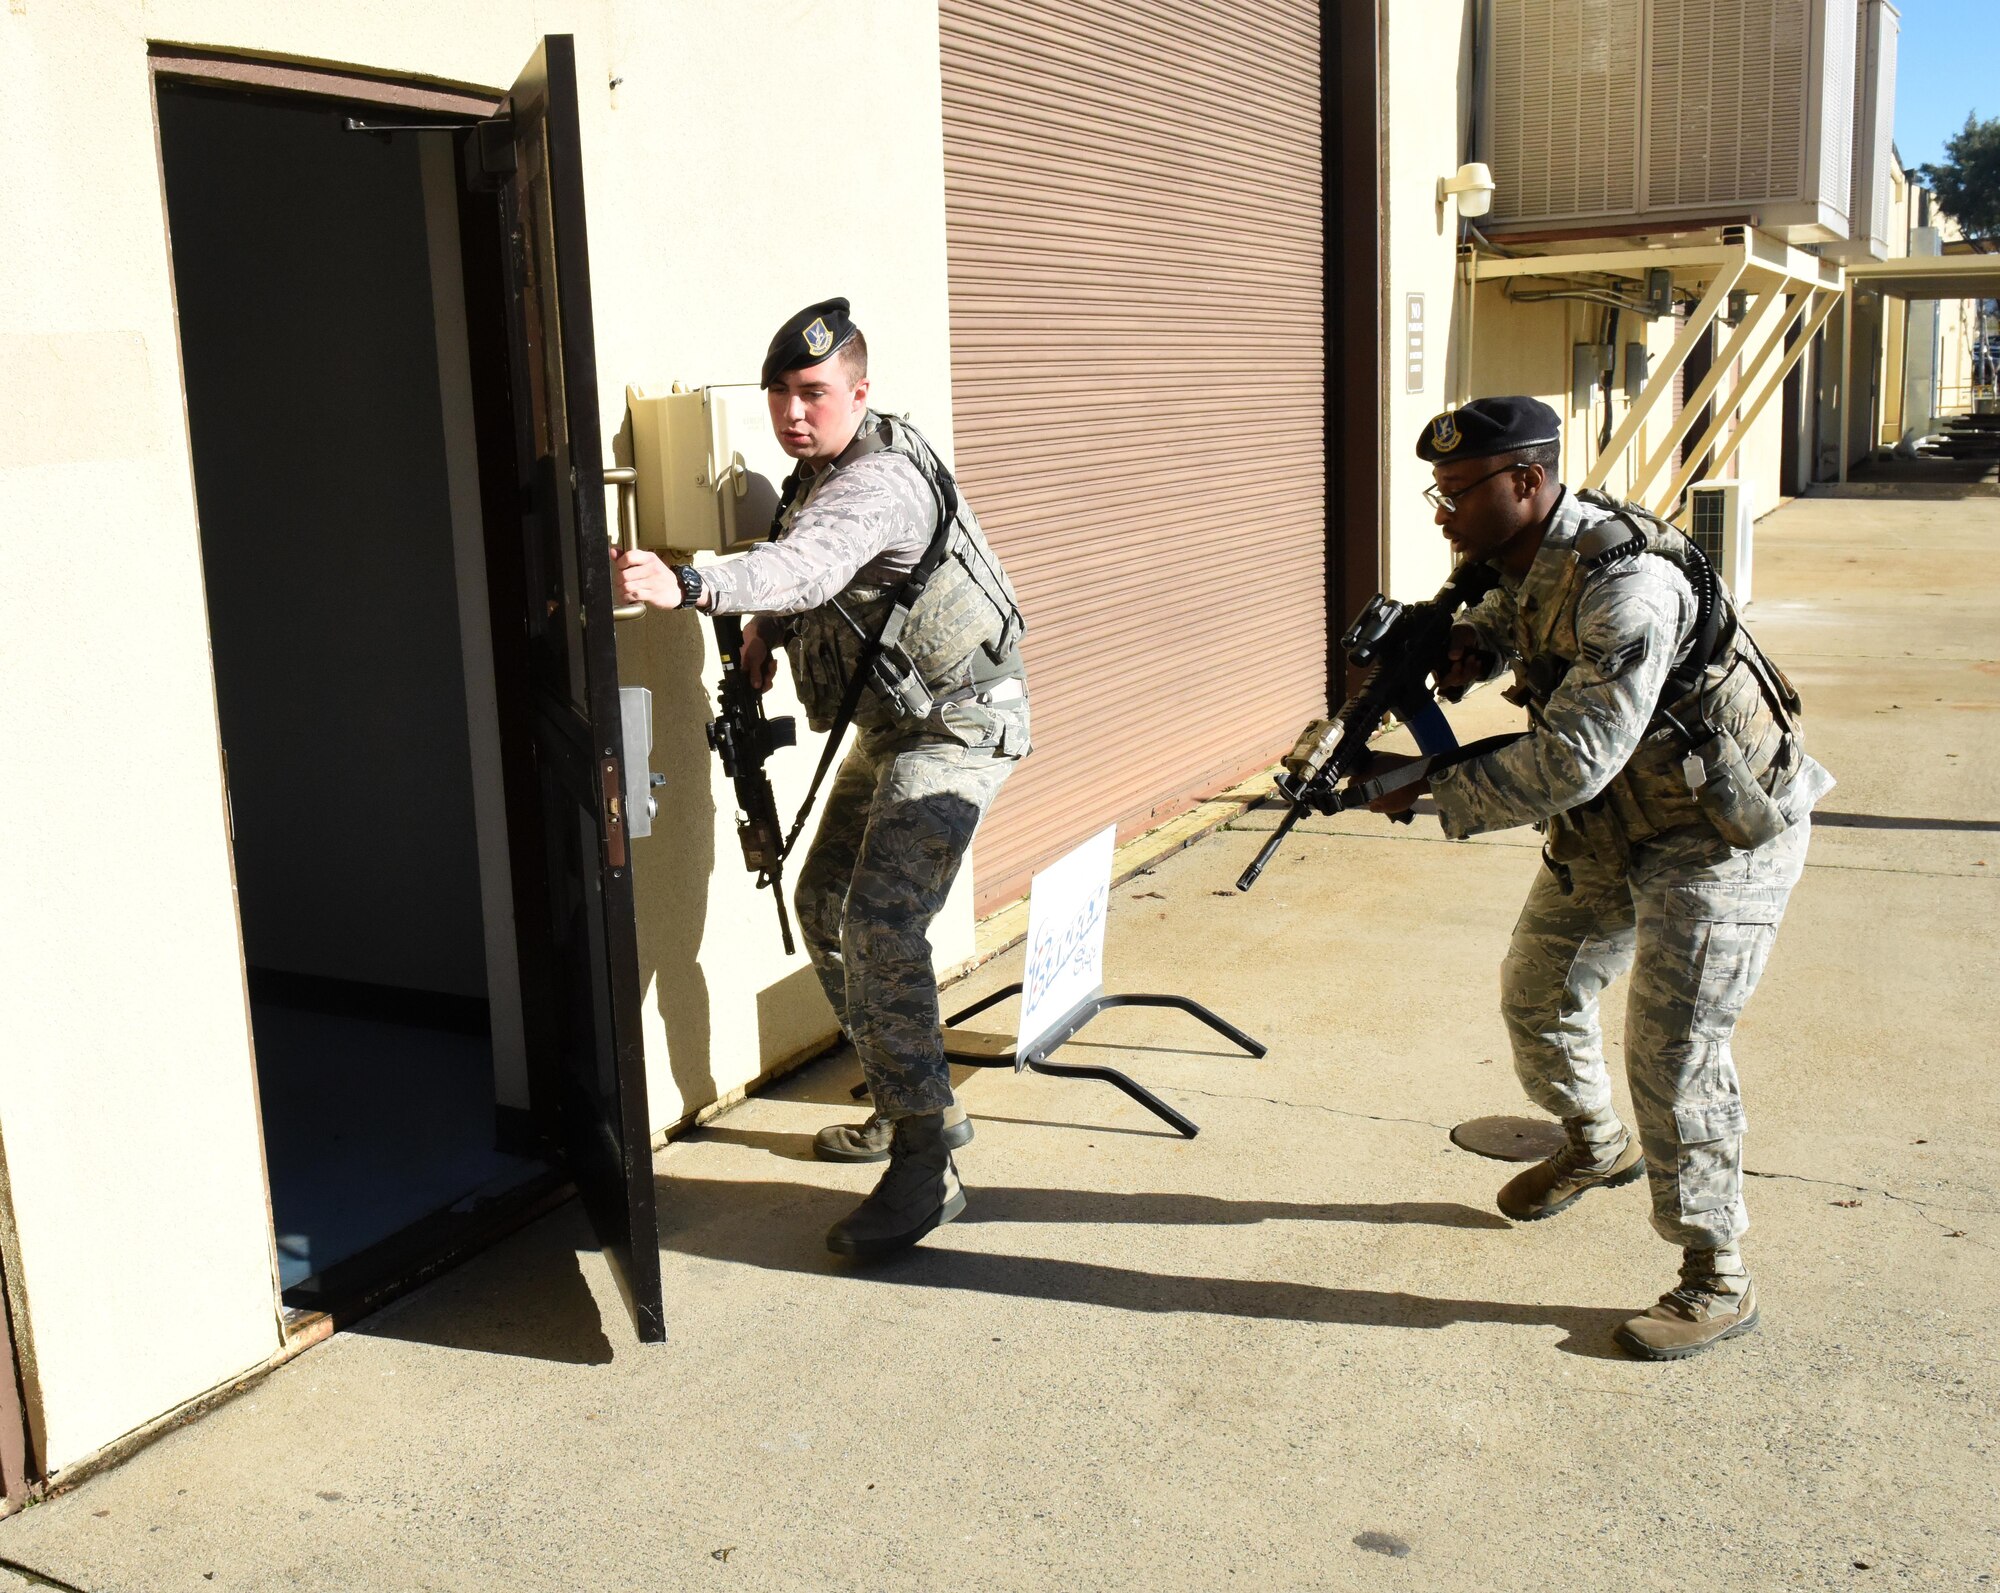 9th Security Forces Squadron Airmen enter a building during an active shooter exercise after arriving on scene Jan. 13, 2017 at Beale Air Force Base, California. The exercise took place in a building on the flightline and began at approximately 10 a.m. (U.S. Air Force photo/John Schwab)